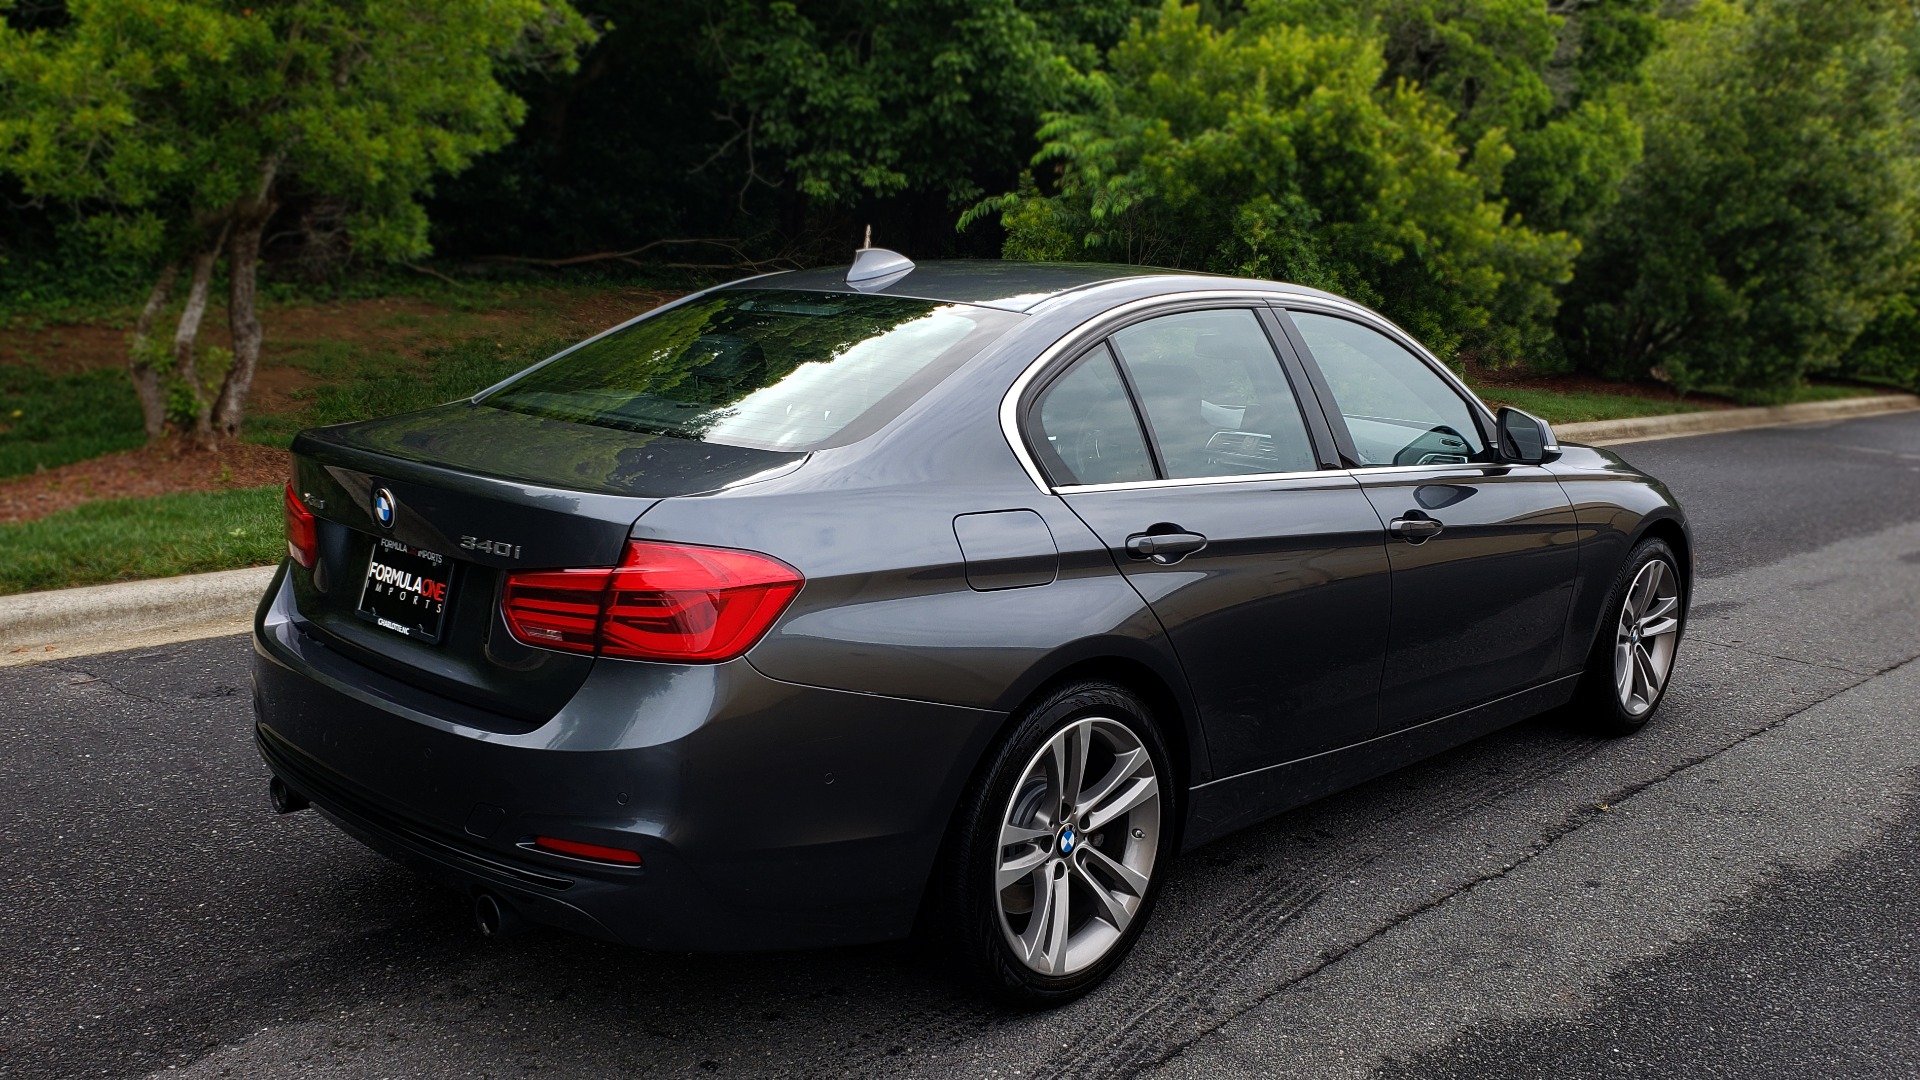 Used 2017 BMW 3 SERIES 340I XDRIVE SPORT / DRVR ASST PLUS / NAV / CLD WTHR / PARK ASST for sale Sold at Formula Imports in Charlotte NC 28227 6